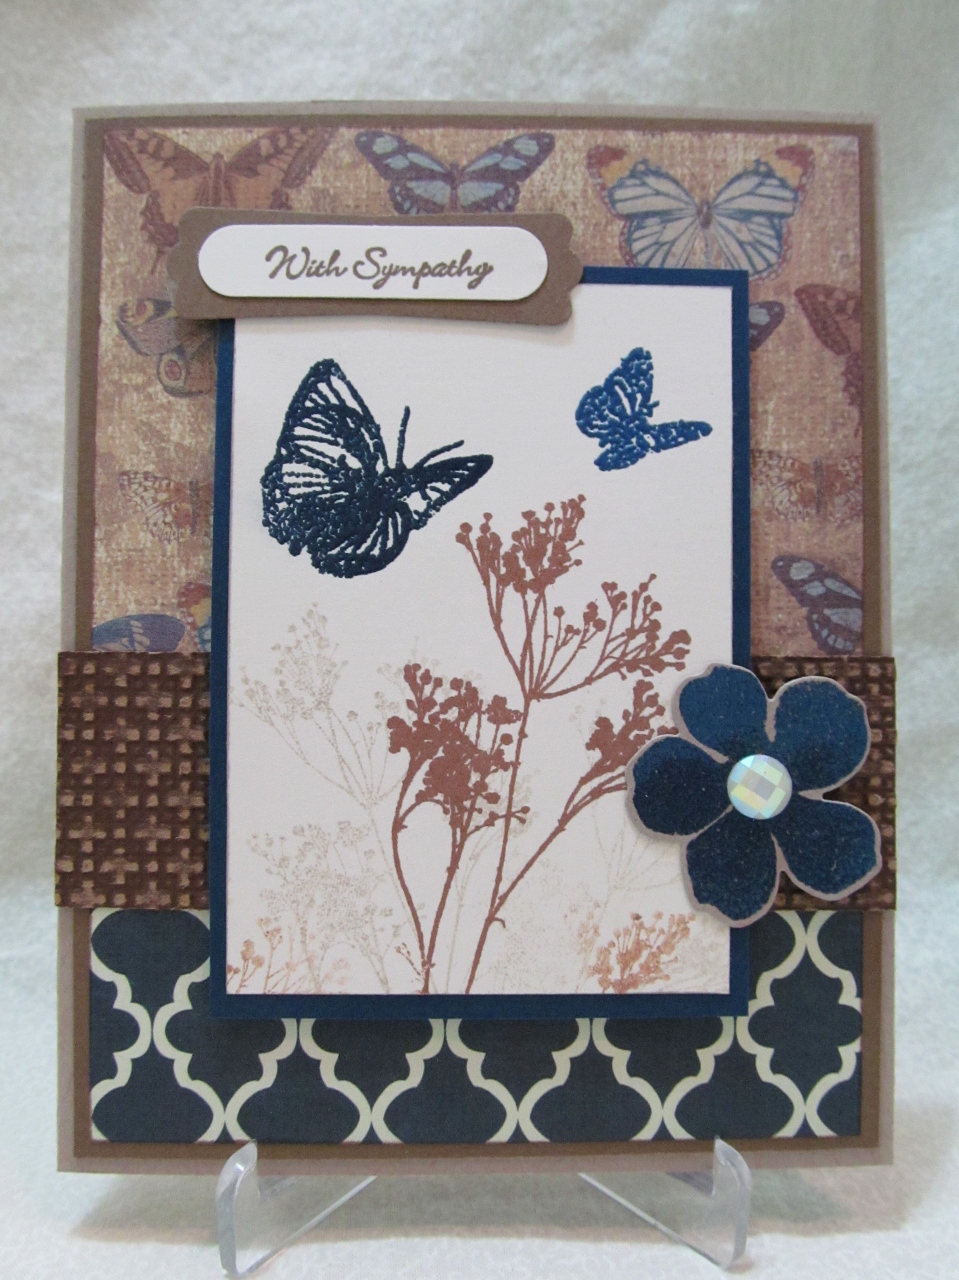 Savvy Handmade Cards: Embossed Butterfly Sympathy Card